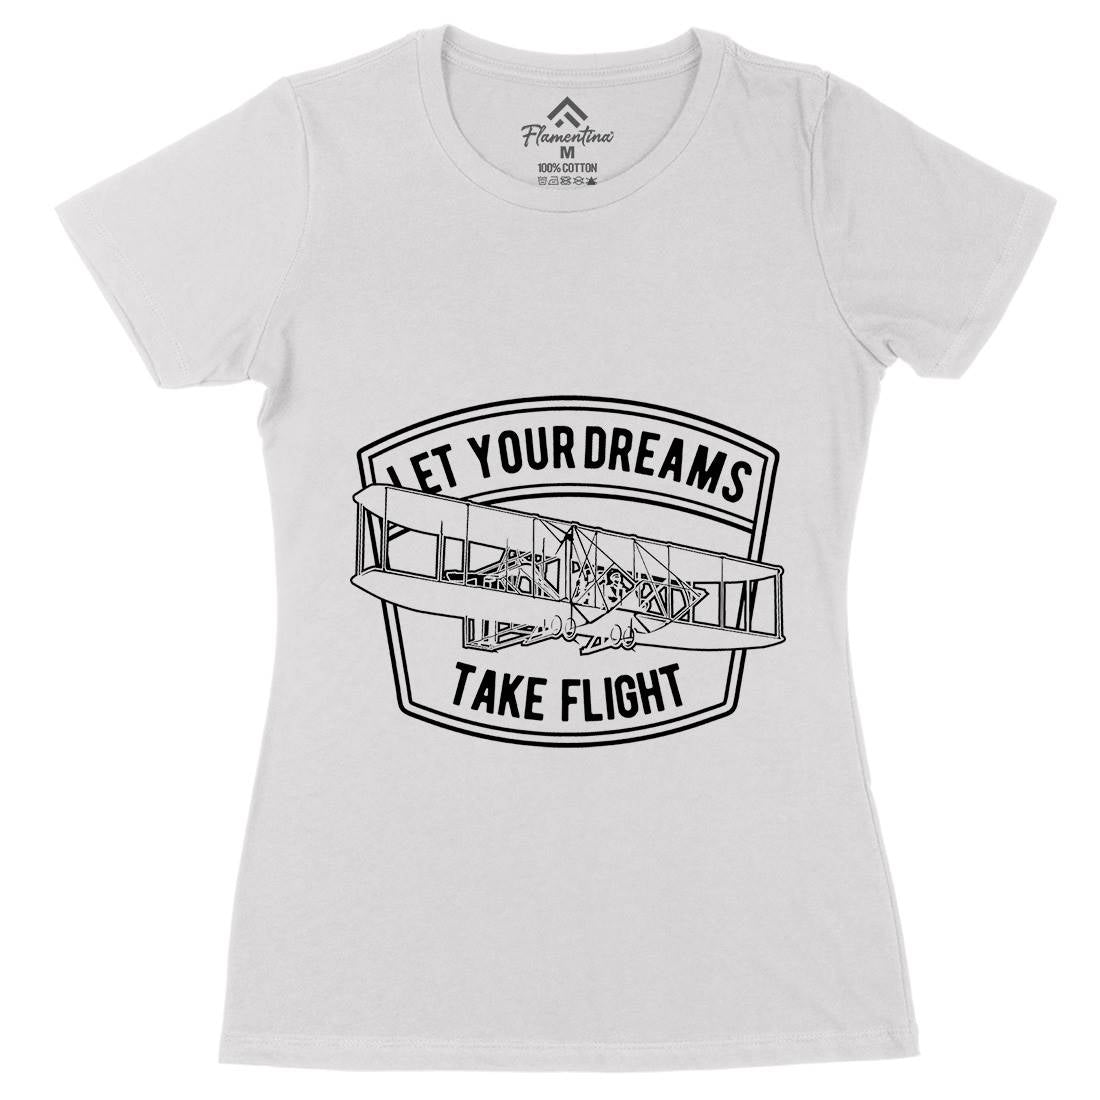 Let Your Dreams Womens Organic Crew Neck T-Shirt Vehicles A706